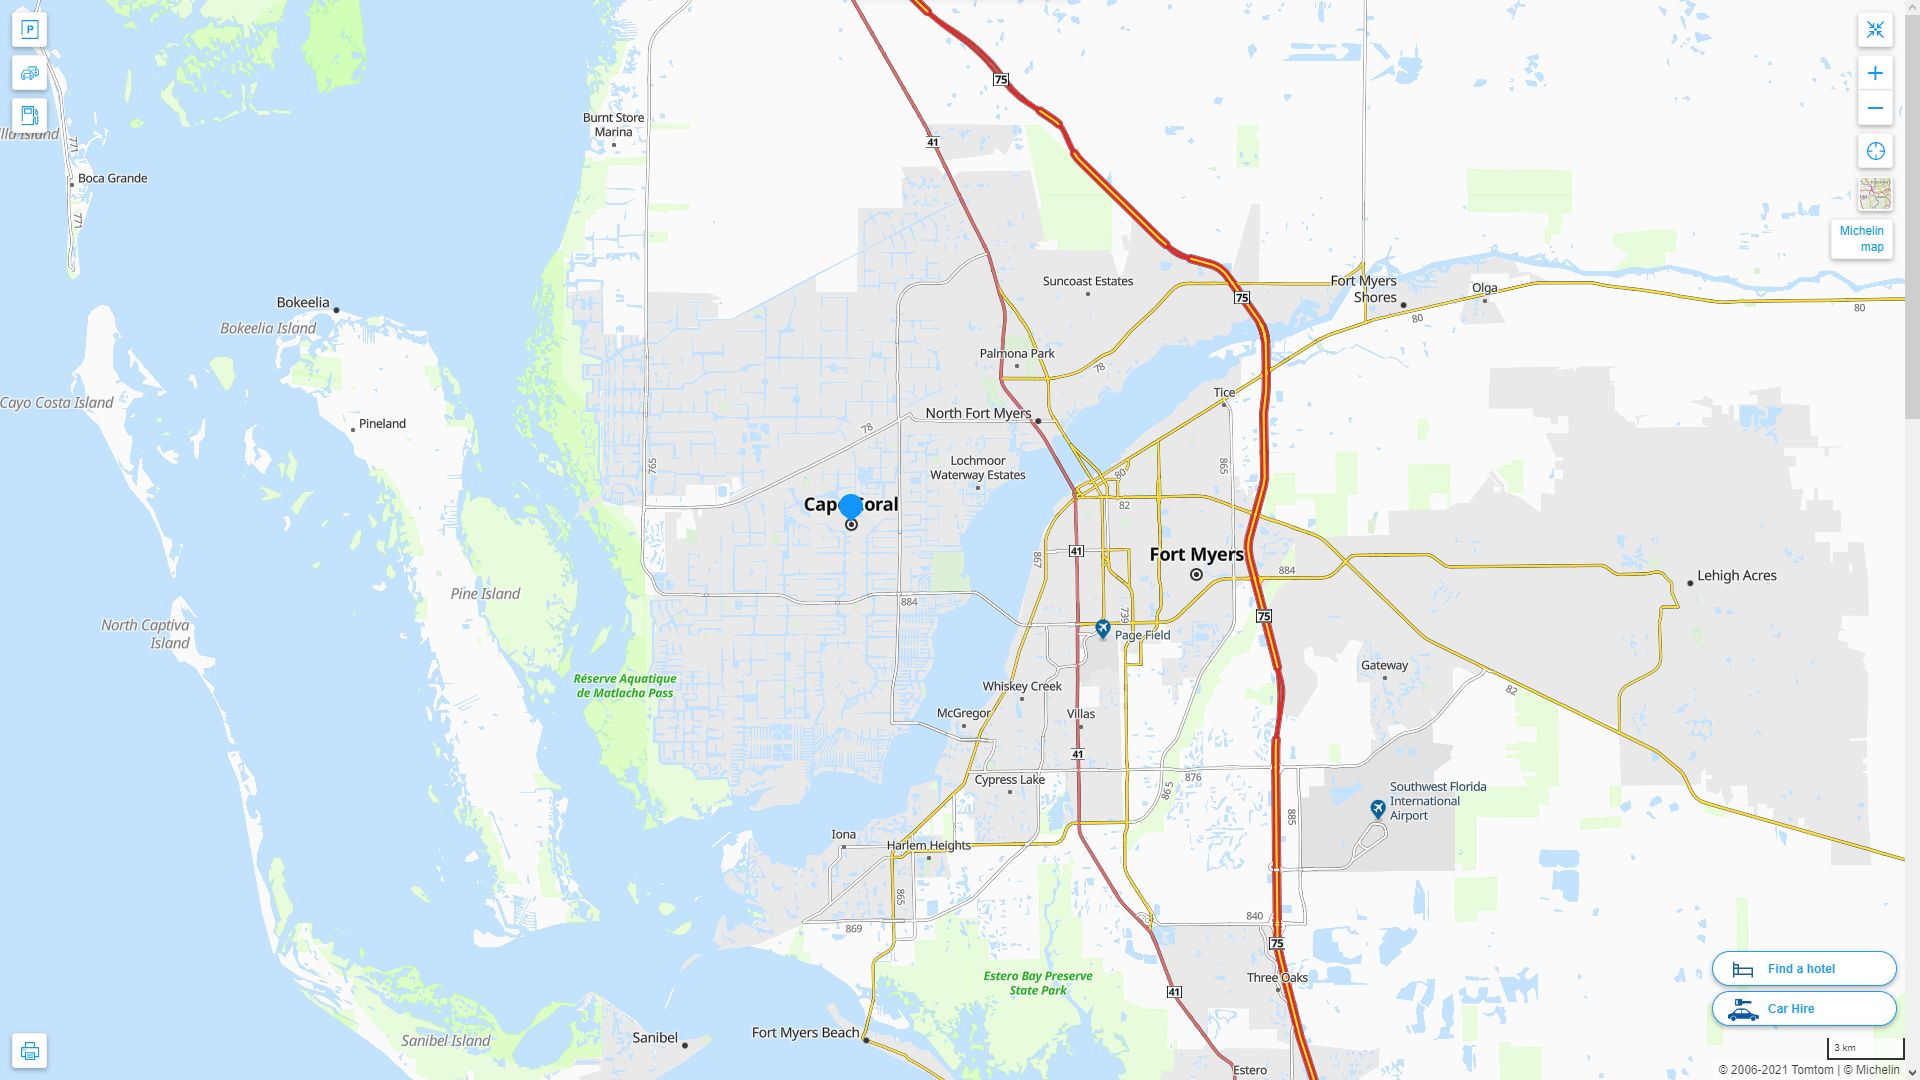 Cape Coral Florida Highway and Road Map